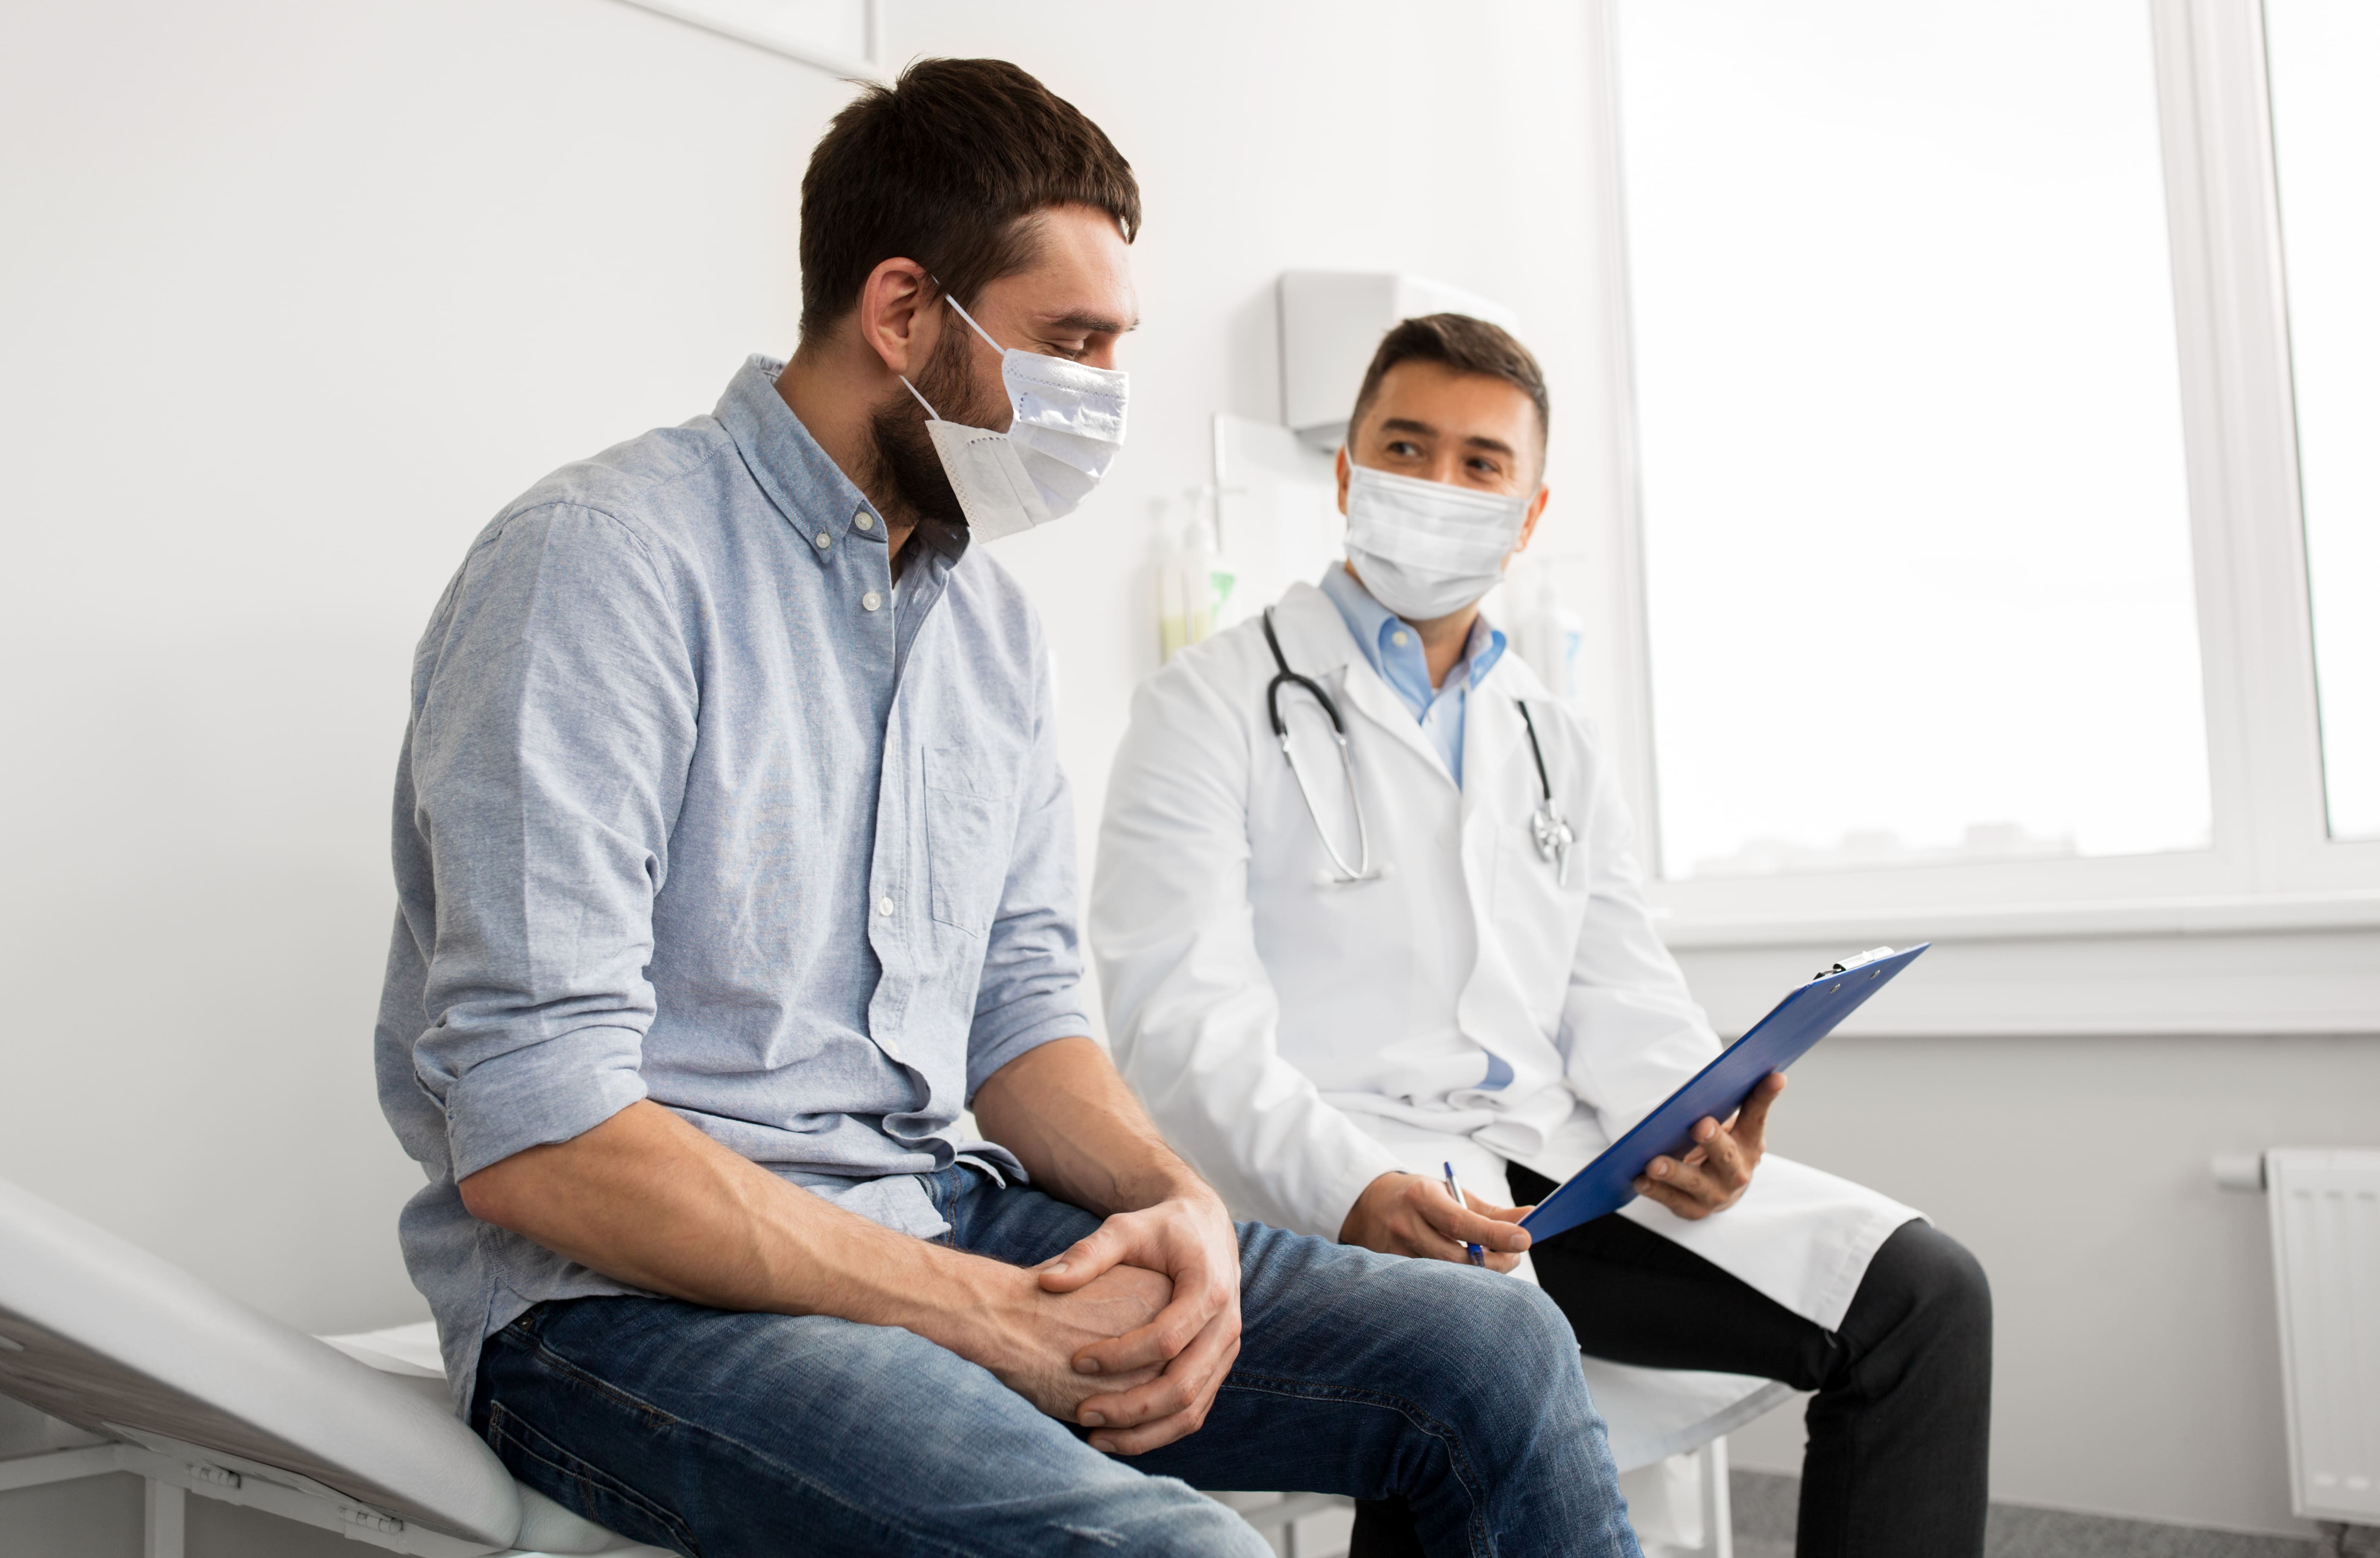 Man speaking with his doctor